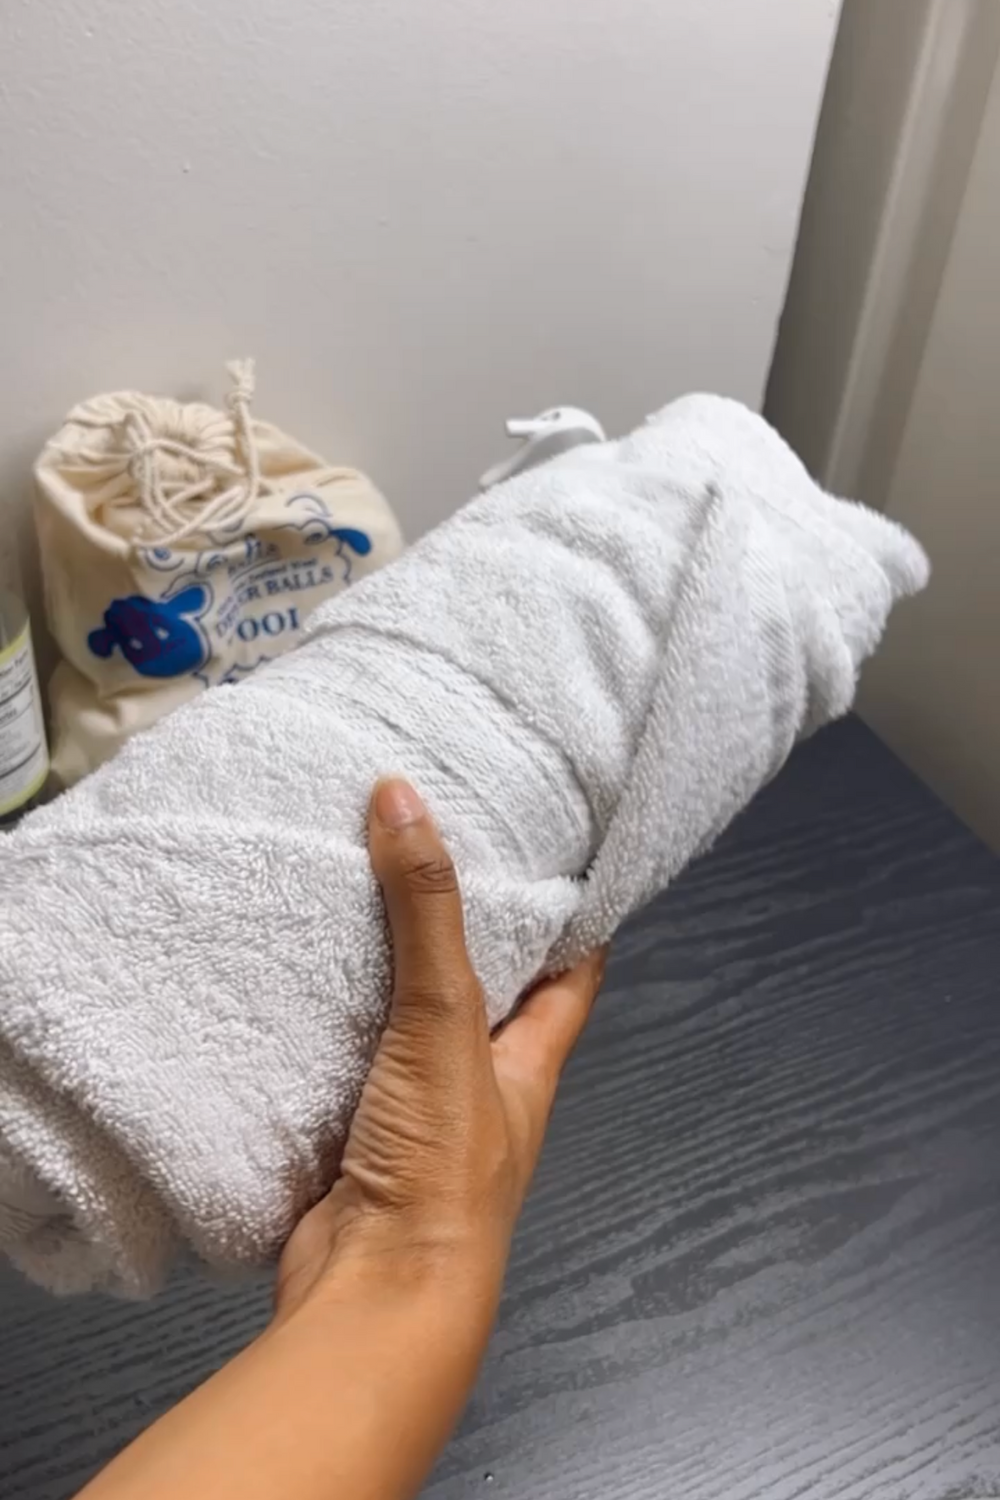 How To Choose Hotel Towels, Buying Guides